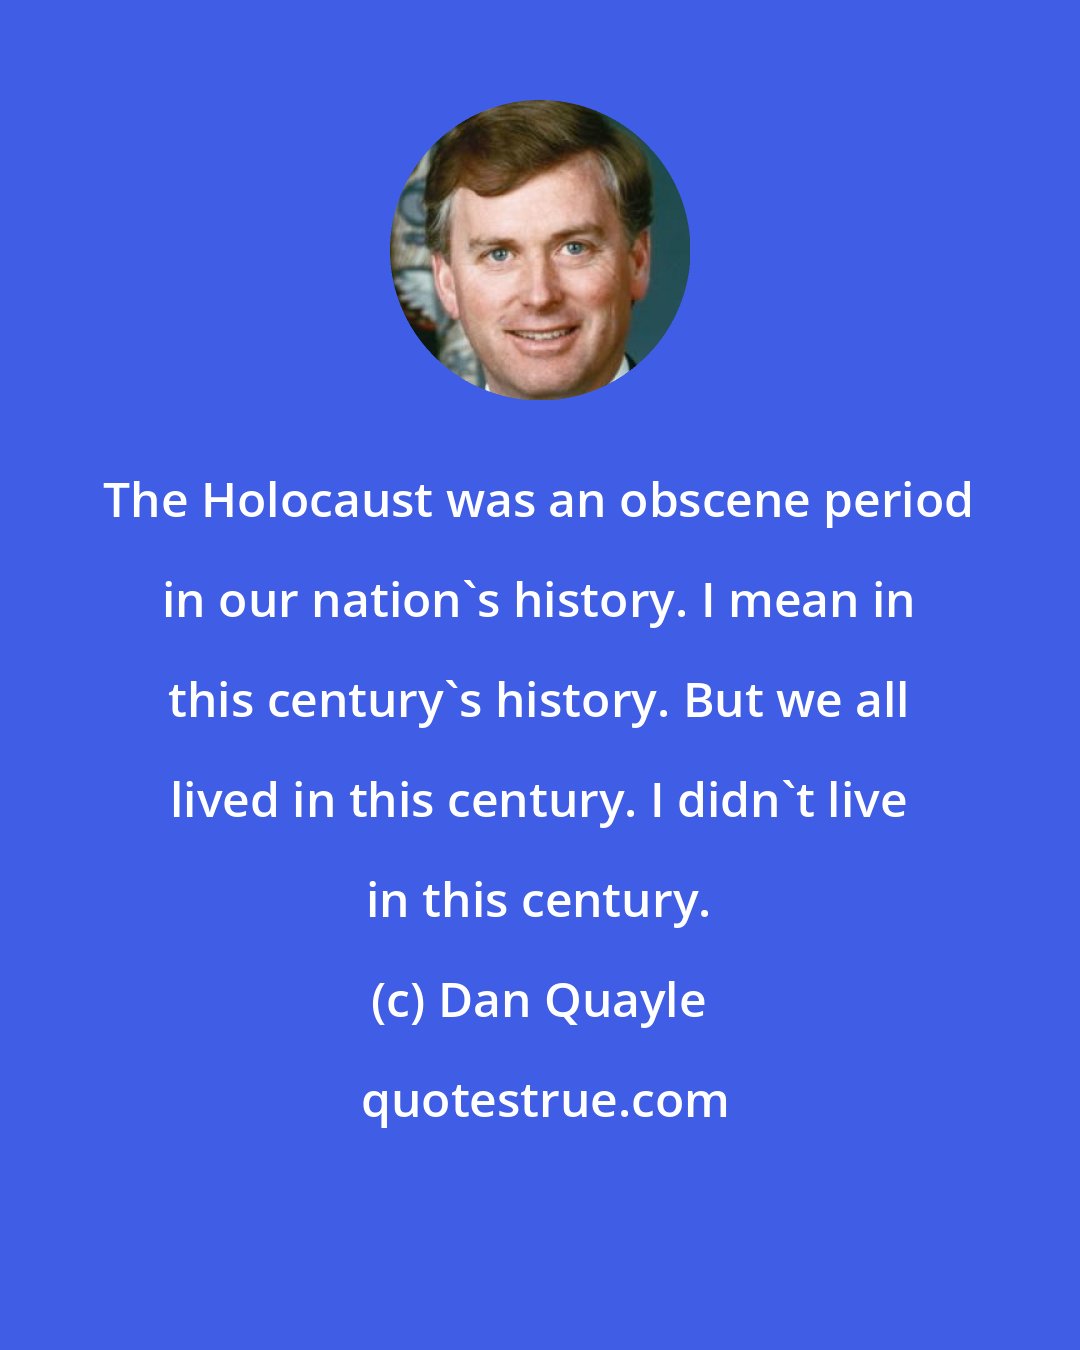 Dan Quayle: The Holocaust was an obscene period in our nation's history. I mean in this century's history. But we all lived in this century. I didn't live in this century.